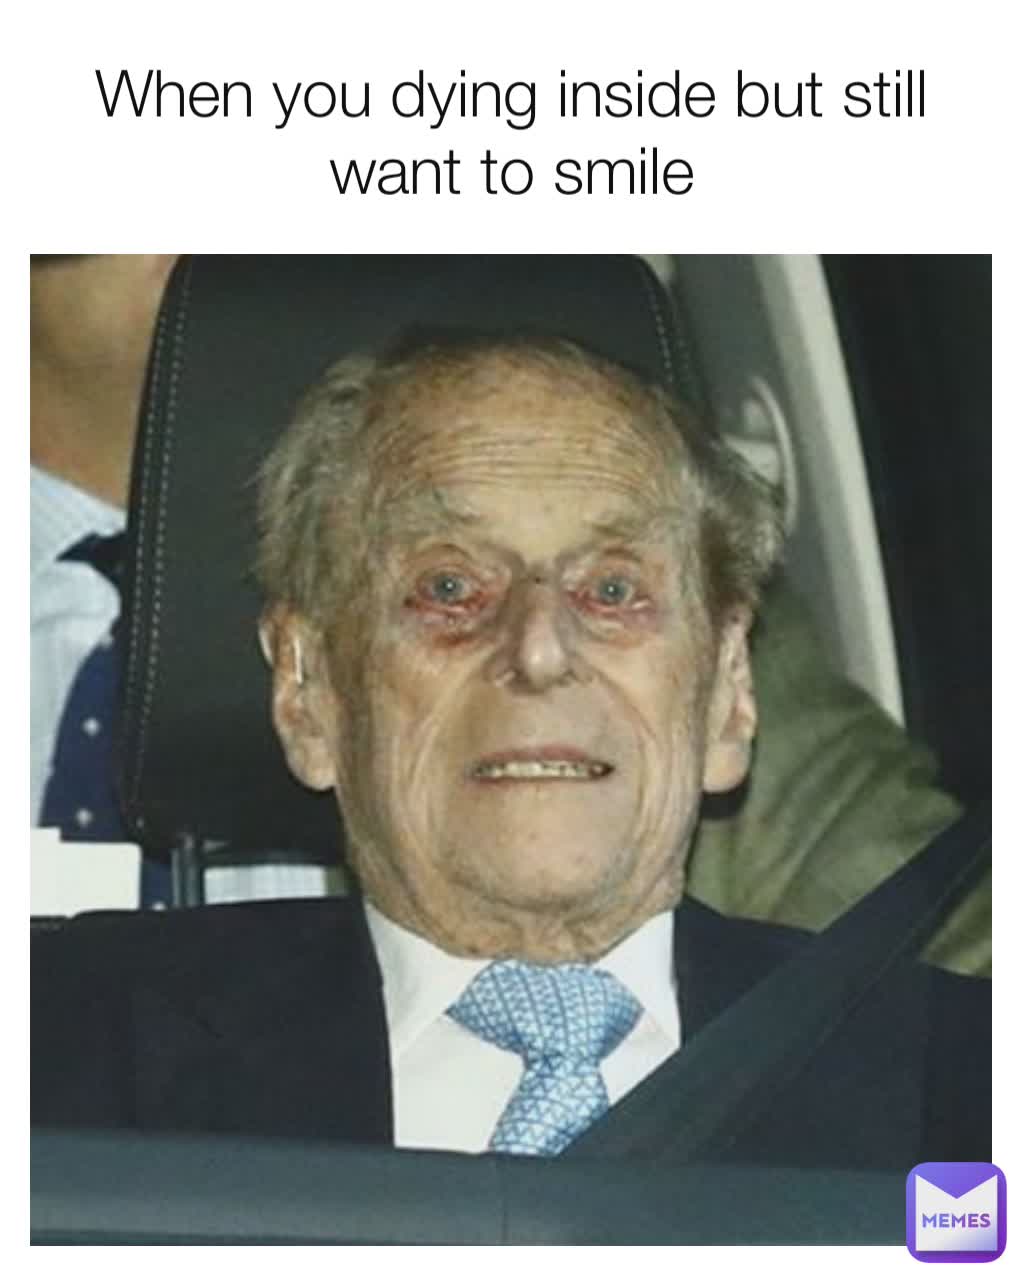 When you dying inside but still want to smile